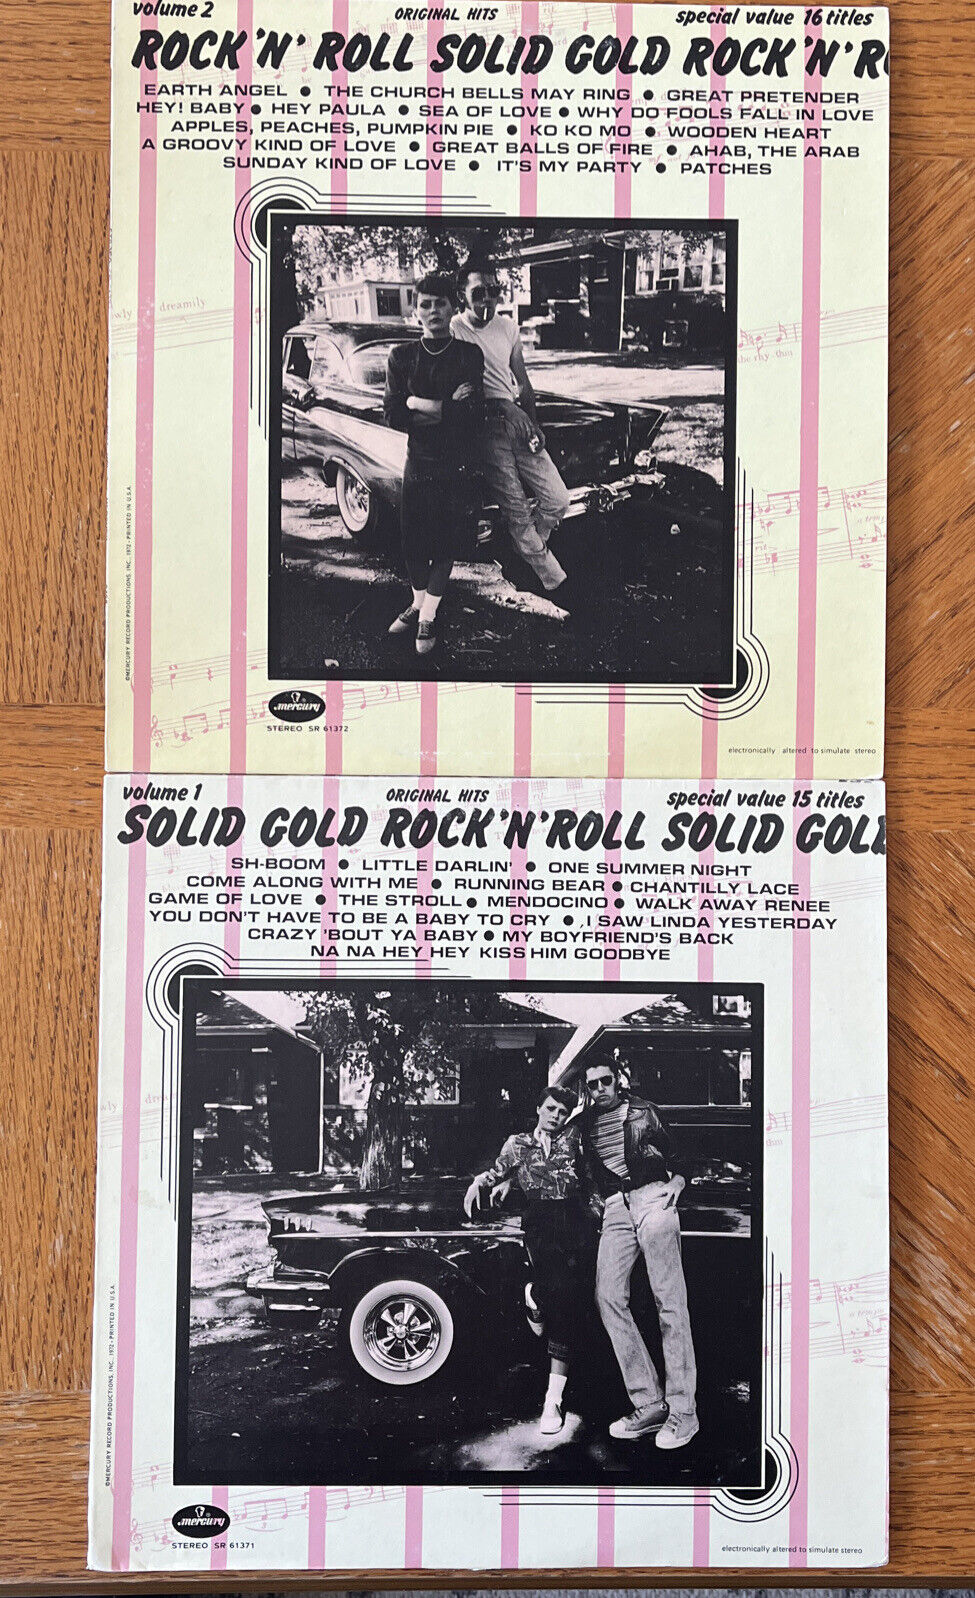 Original Hits Solid Gold Rock ‘N’ Roll  Volume 1 And 2 Mercury  ST 61371 61372